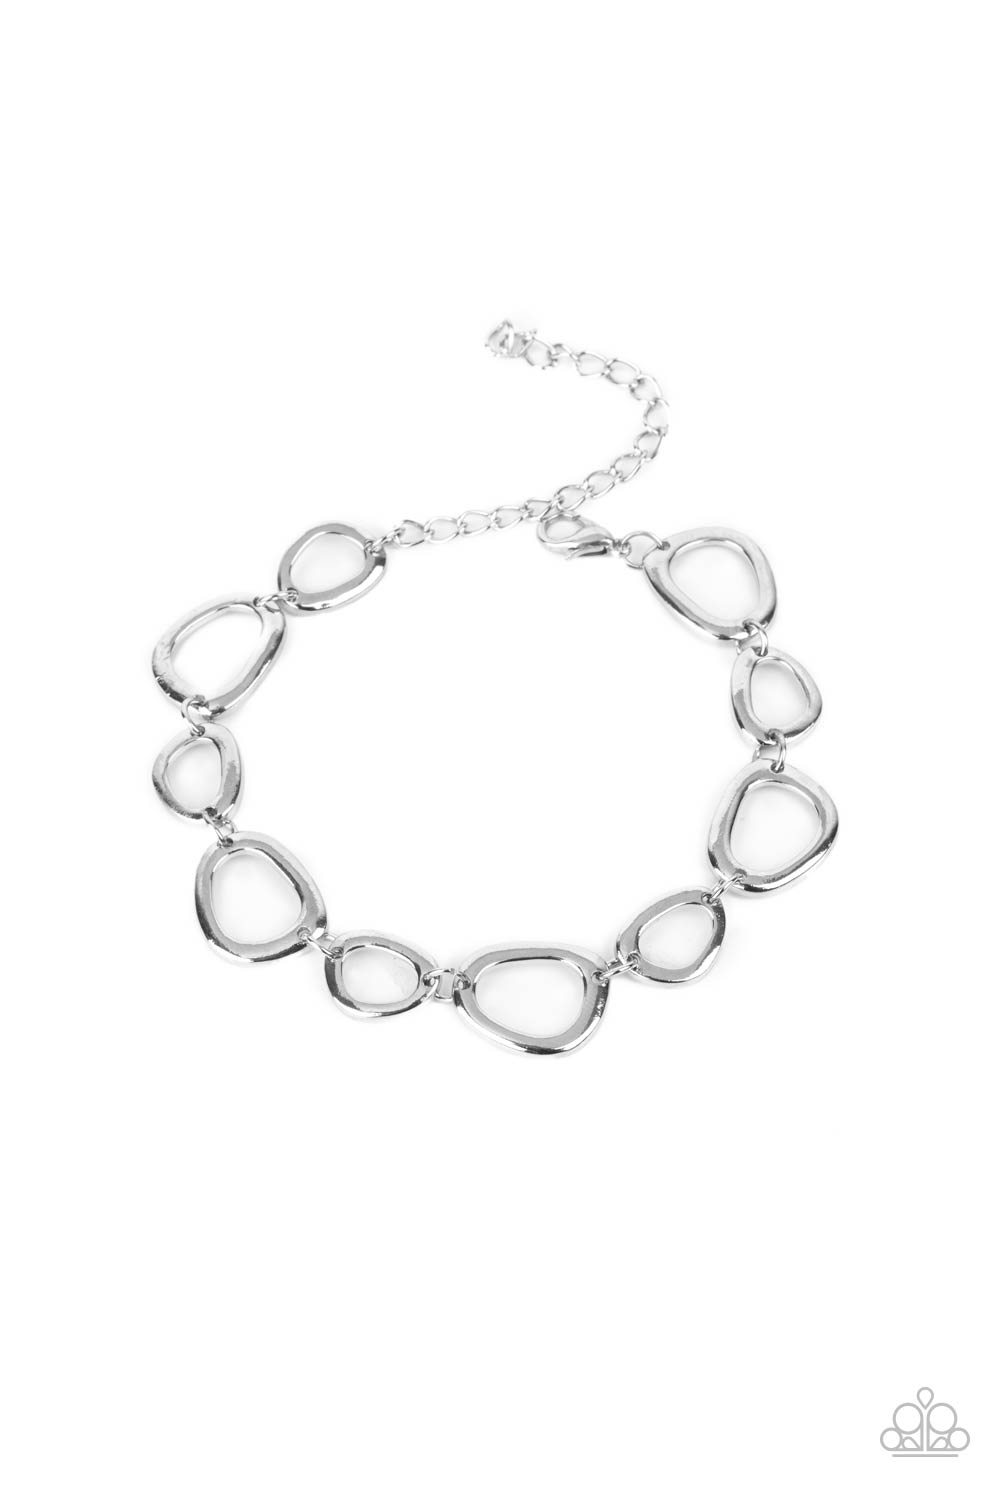 ​All That Mod - Silver Stylish Bracelet - Paparazzi Accessories - 
An array of irregular shaped silver rings link together and make their way around the wrist for a simple yet stylish avant-garde fashion. Features an adjustable clasp closure. Sold as one individual bracelet.
